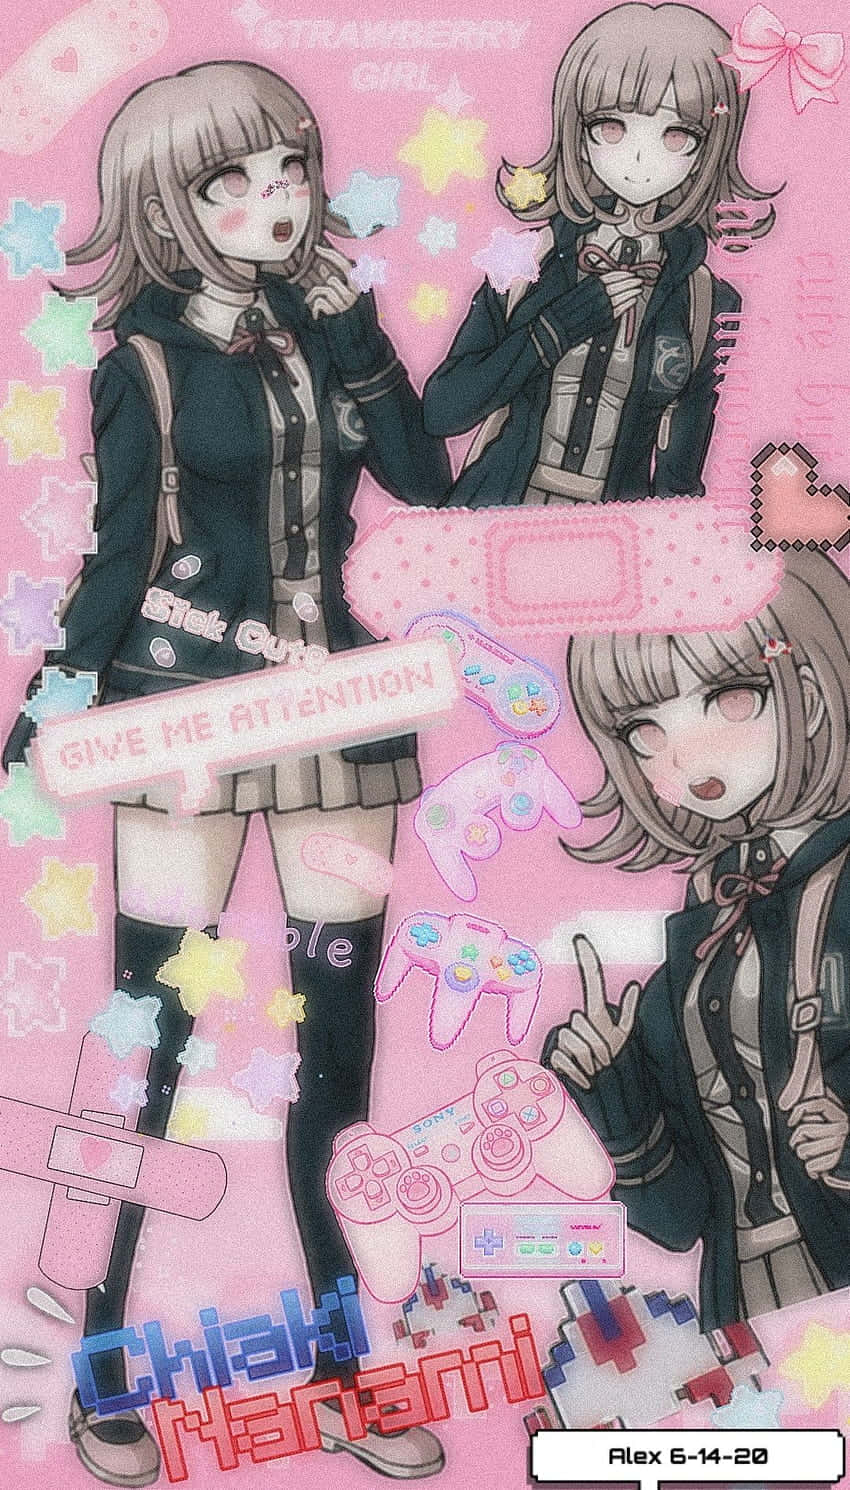 Aesthetic anime girl collage wallpaper for phone with a pink background - Danganronpa